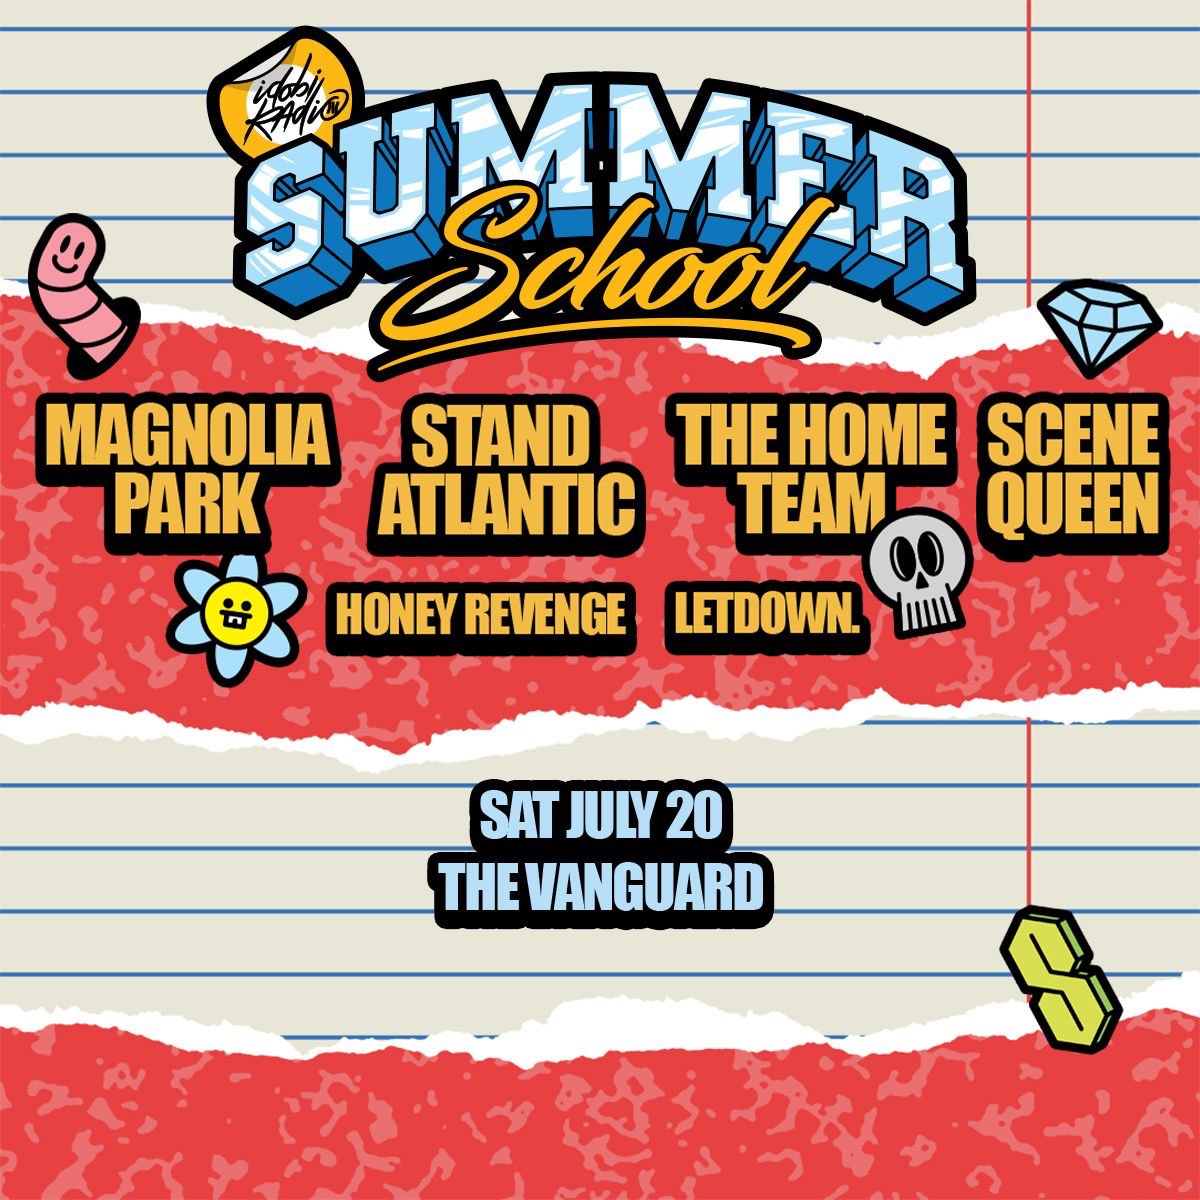 The Summer School Tour featuring @Magnoliaparkfl @standatlantic @TheHomeTeamNW @scenequeenrocks @honeyrevengeca and @letdownmusic is coming to Orlando on Saturday, July 20! ✏️📚 Tickets on sale Friday, April 5 @ 12:00pm